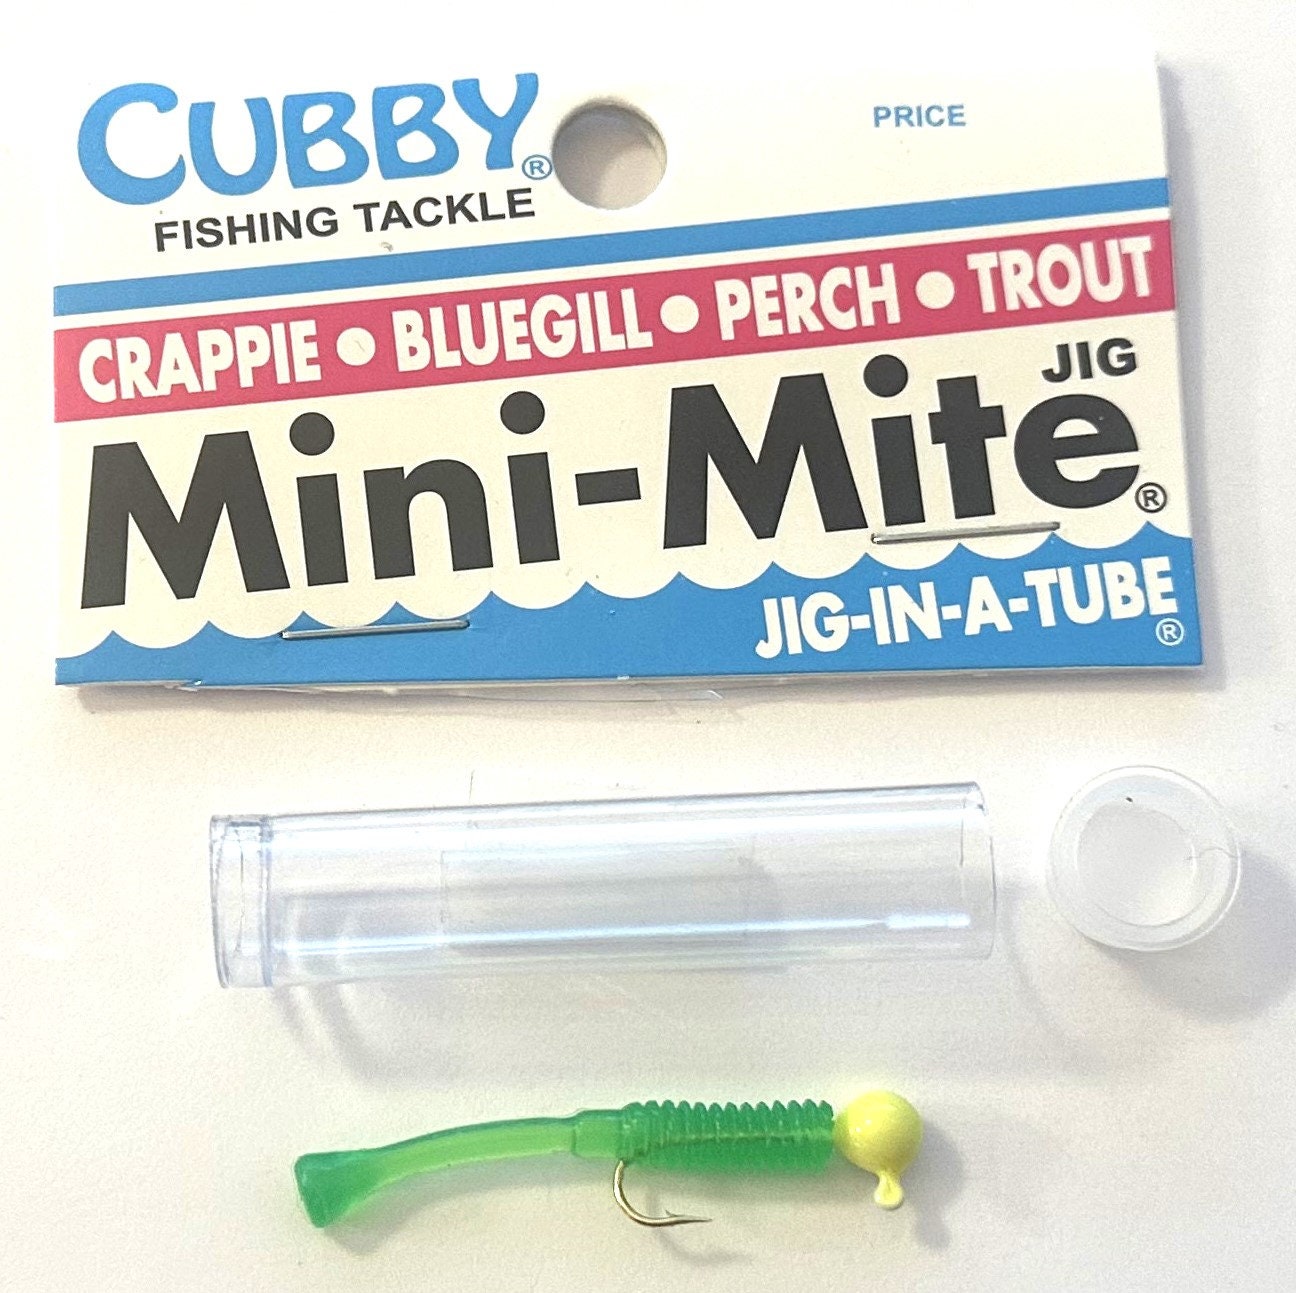 Hand Made Jig-in-a-tube, Cubby Fishing Tackle, Mini-mite Jig